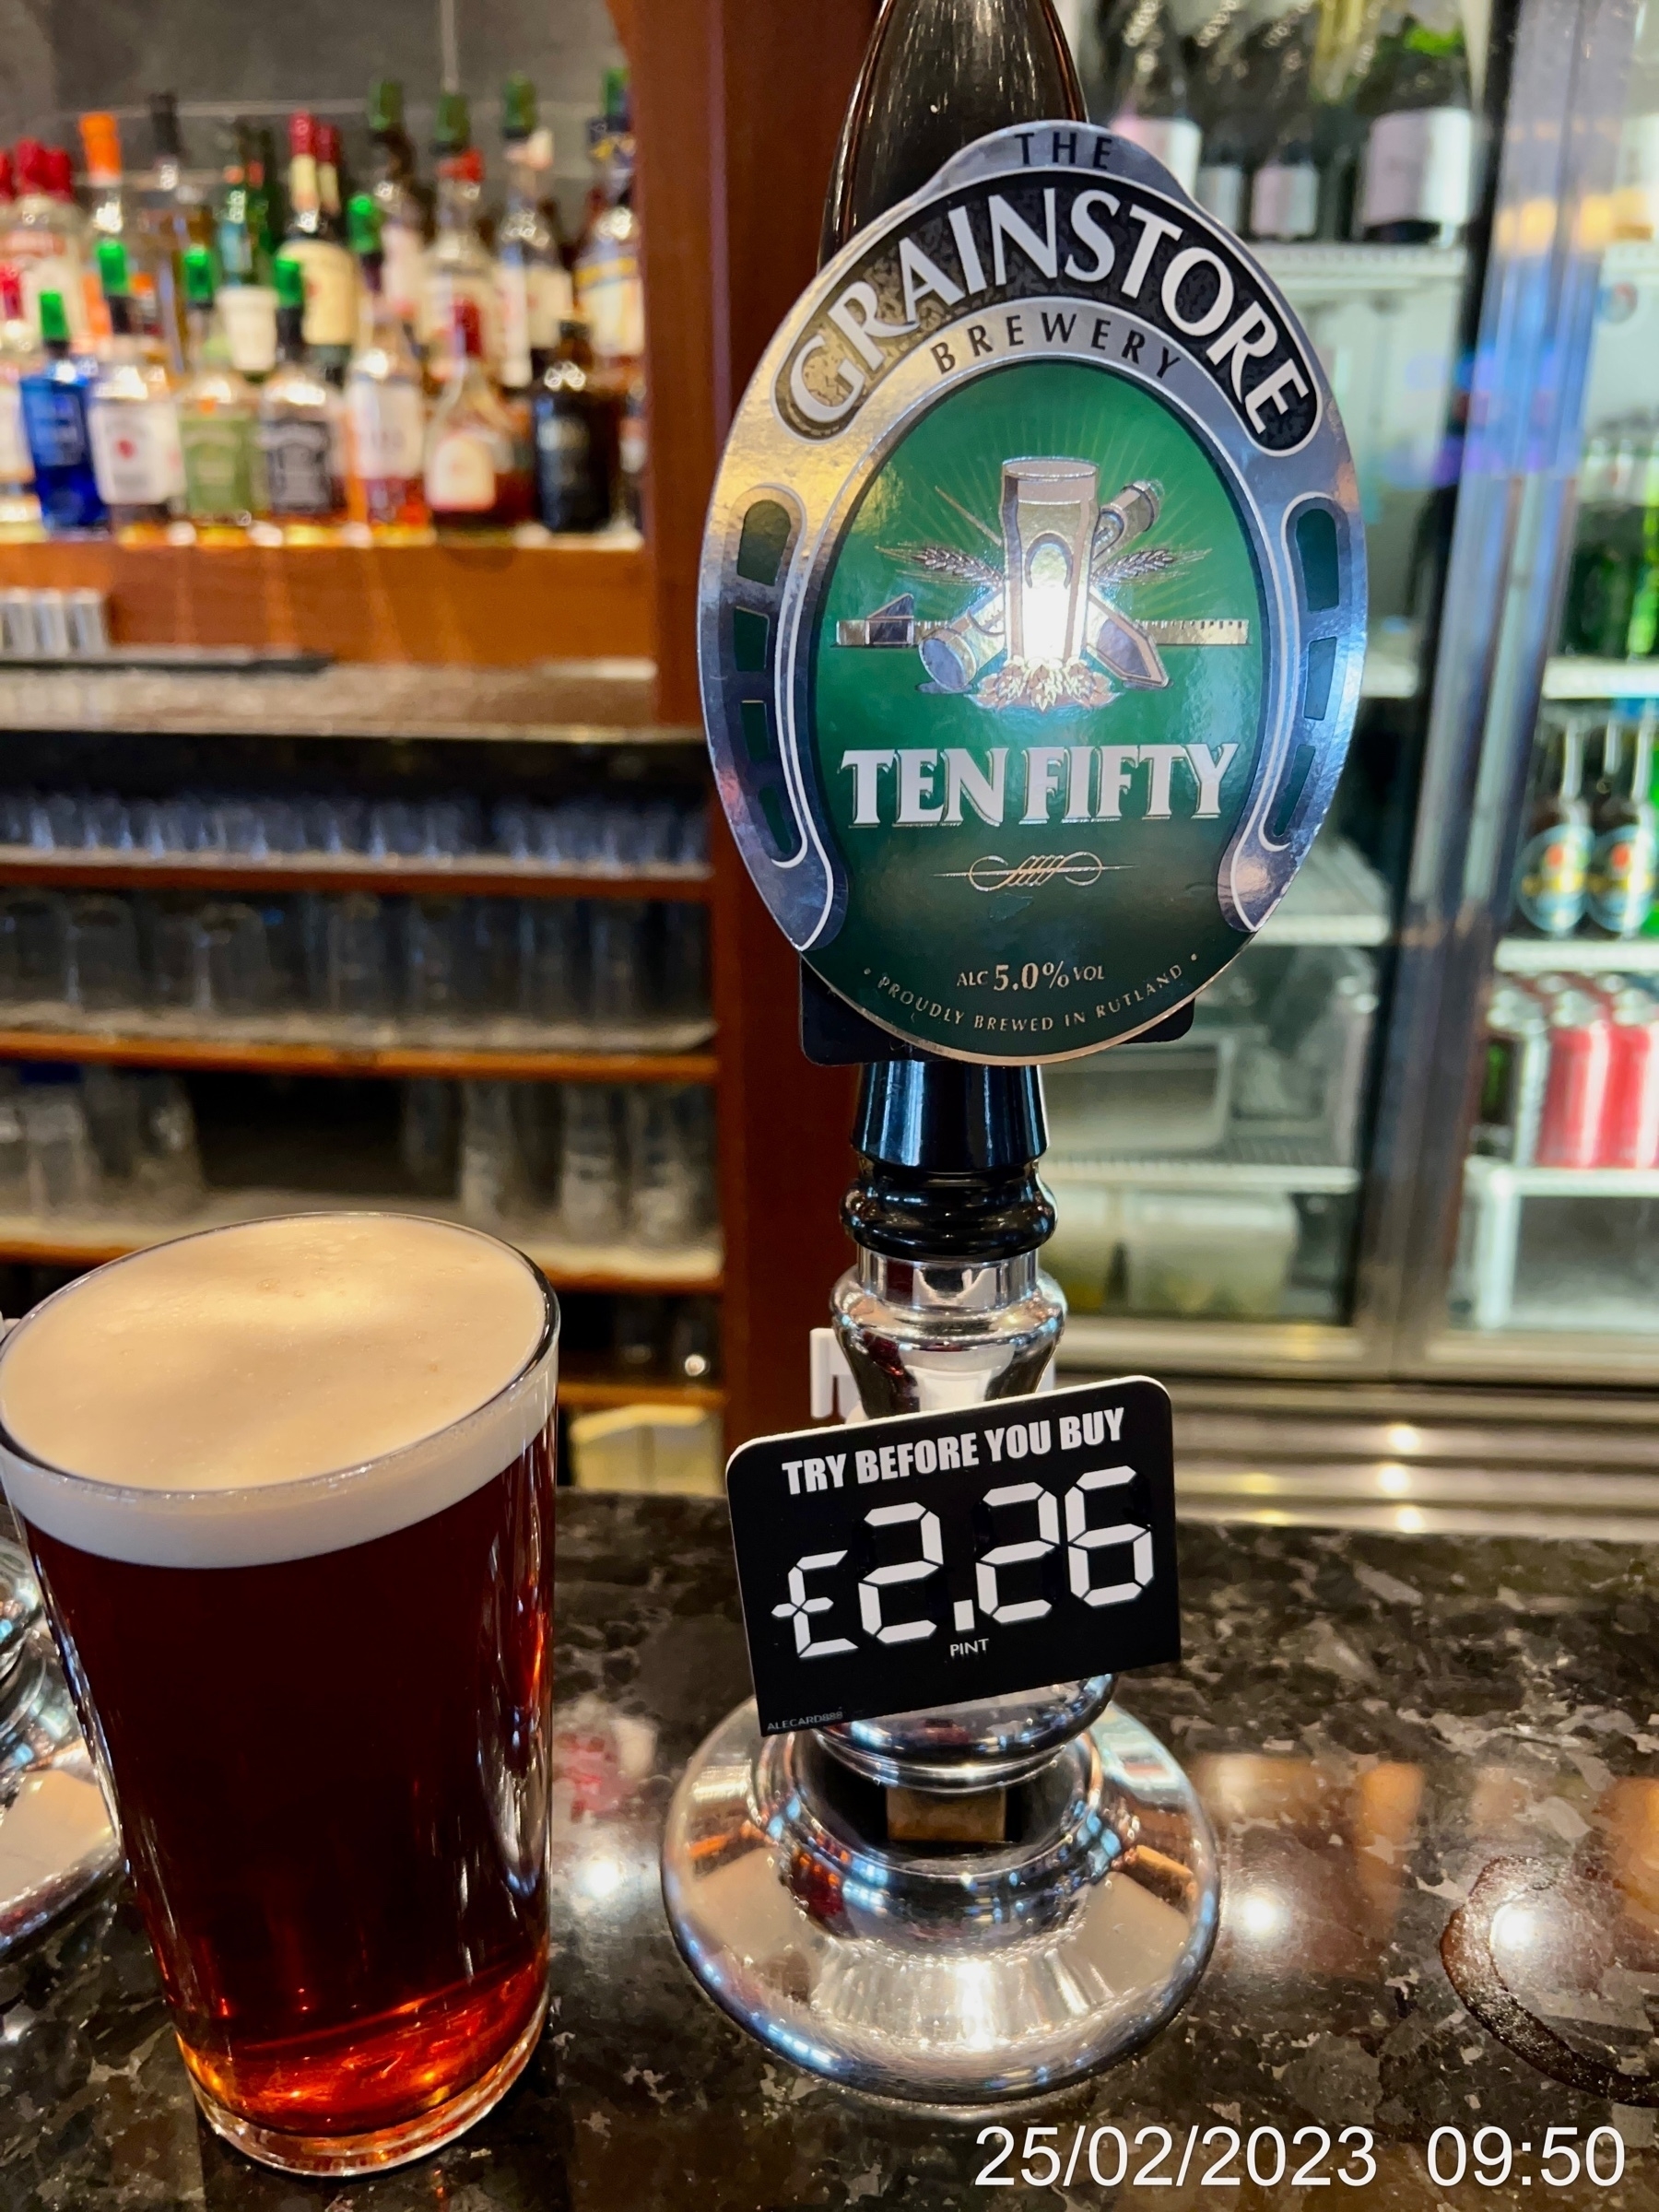 A Pint of Ten Fifty by Grainstore Brewery 